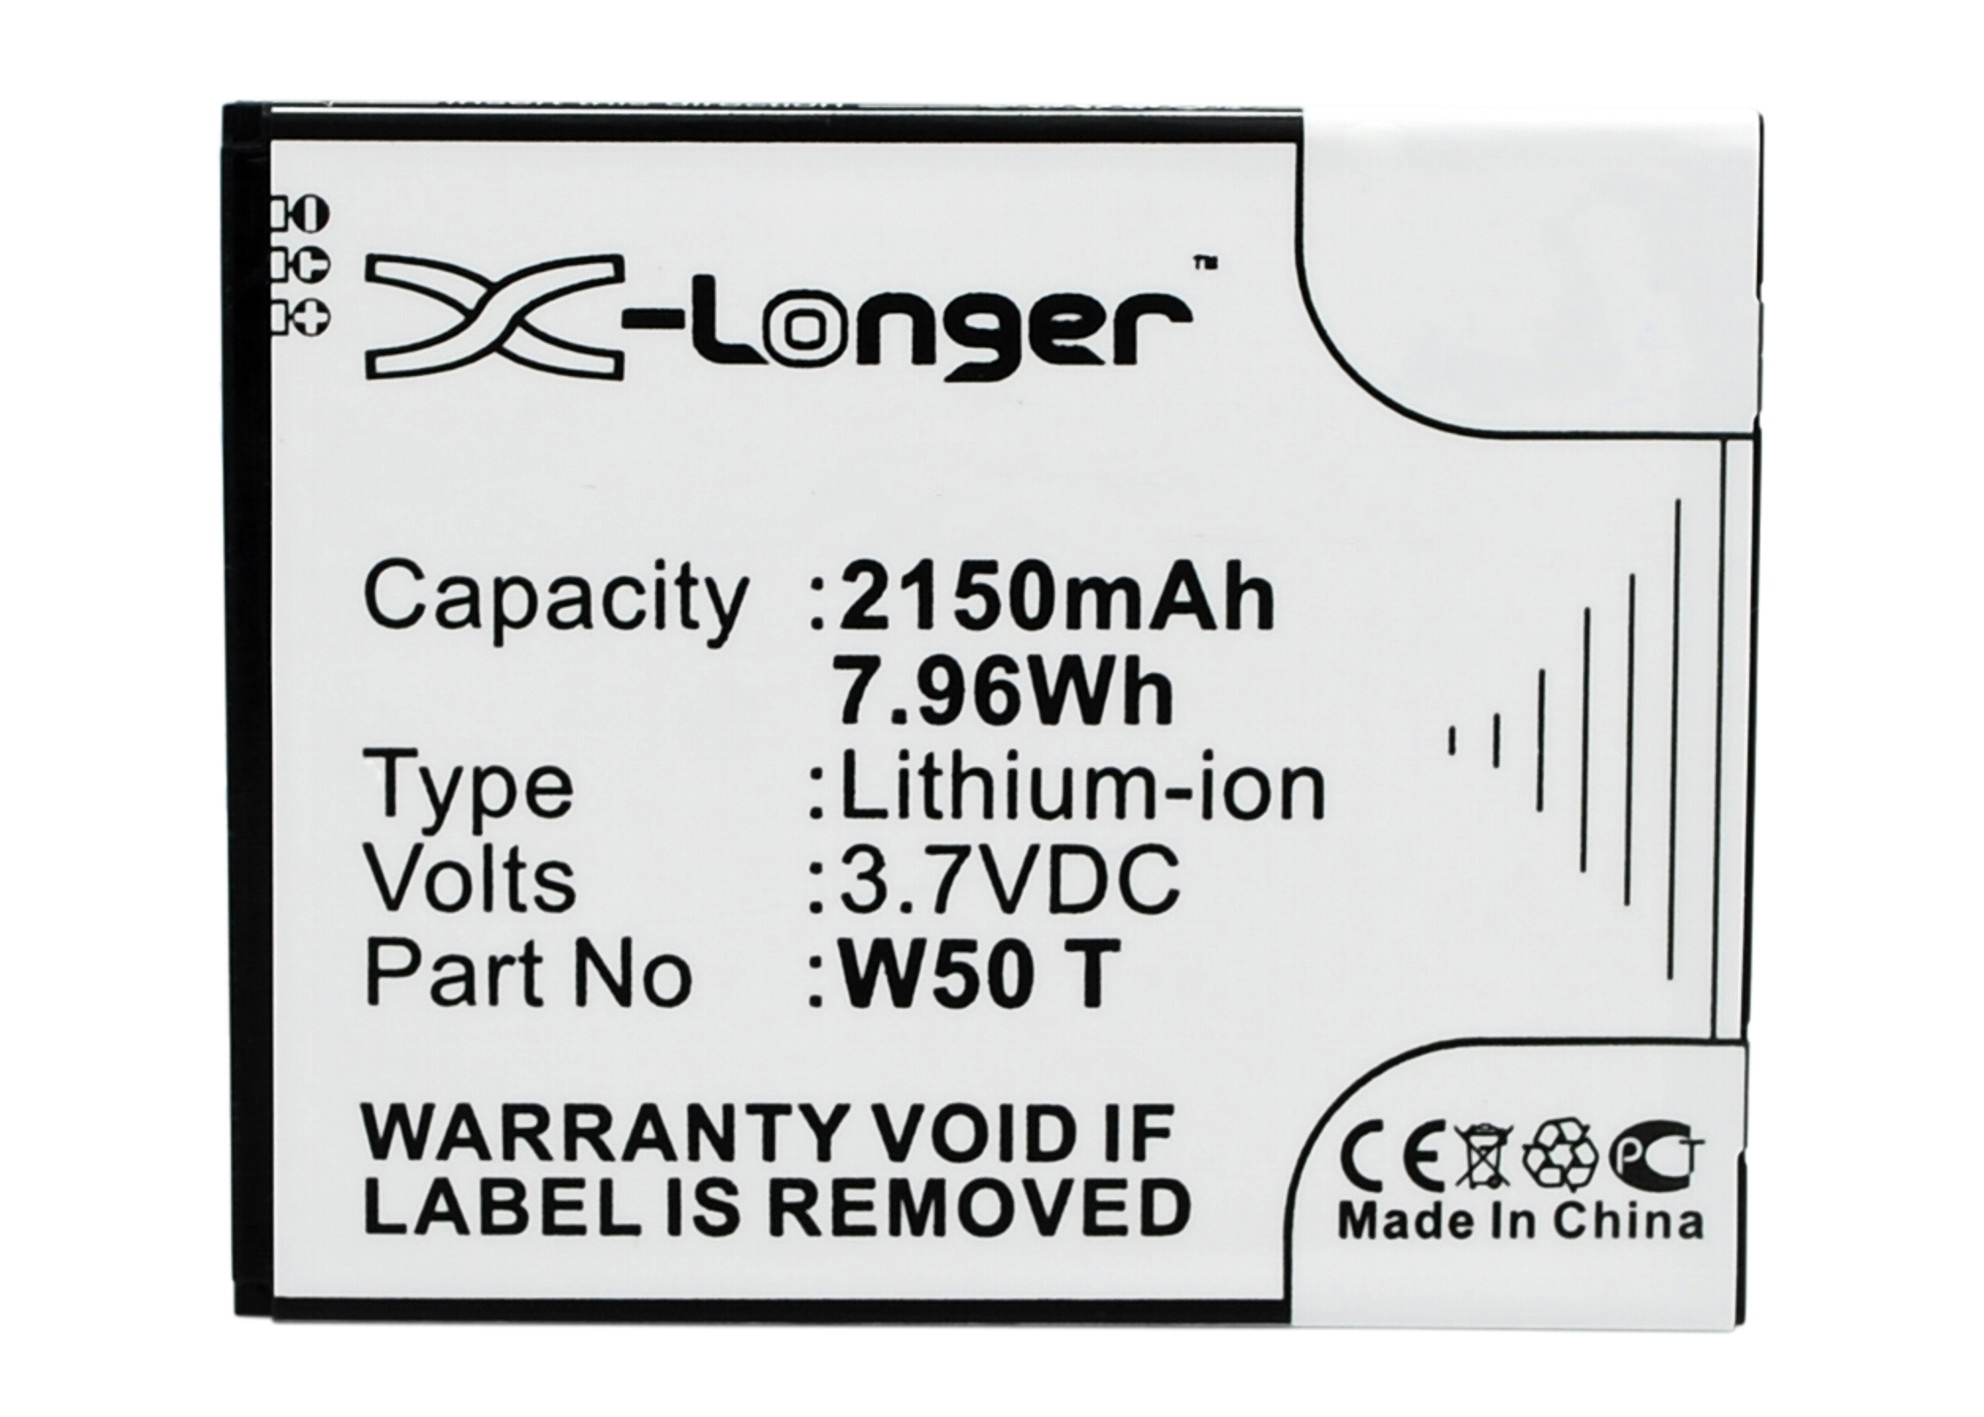 Batteries for ZOPOCell Phone